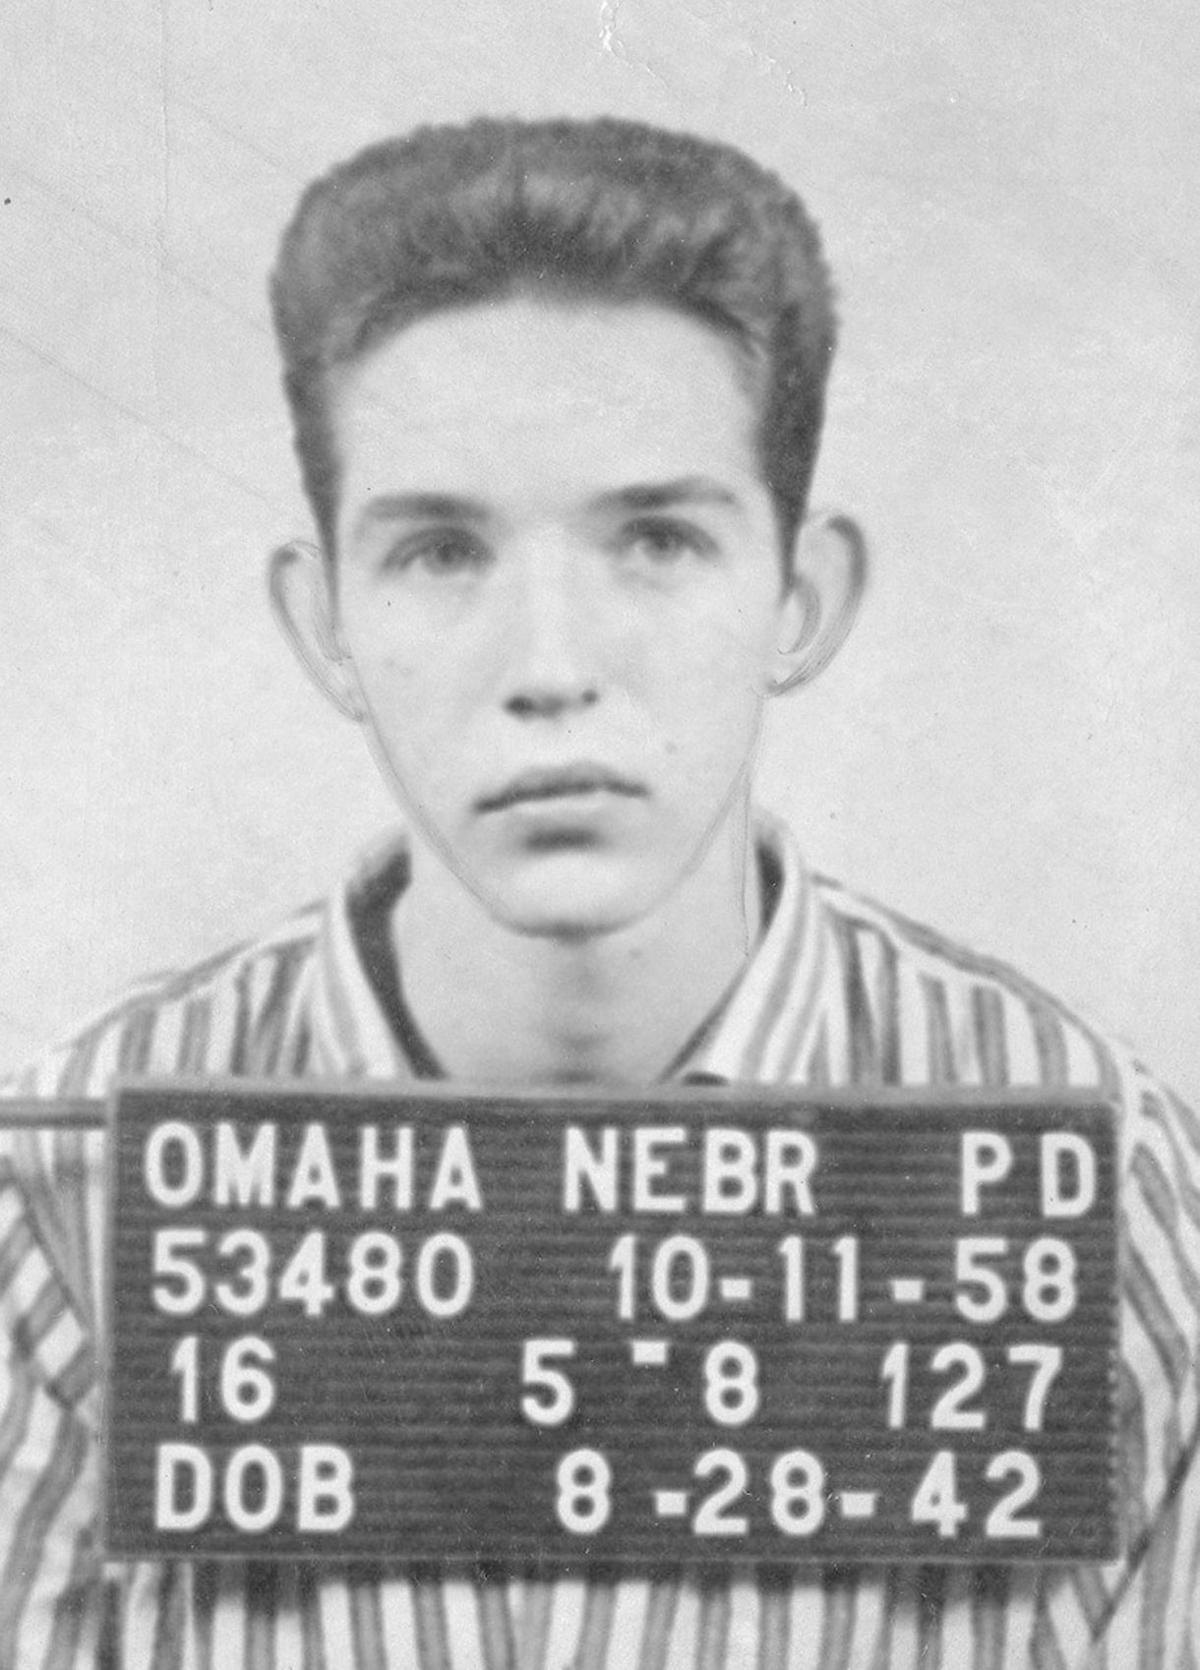 Back in the day, Oct. 11, 1958: Leslie Arnold confesses to killing parents and leads police to bodies